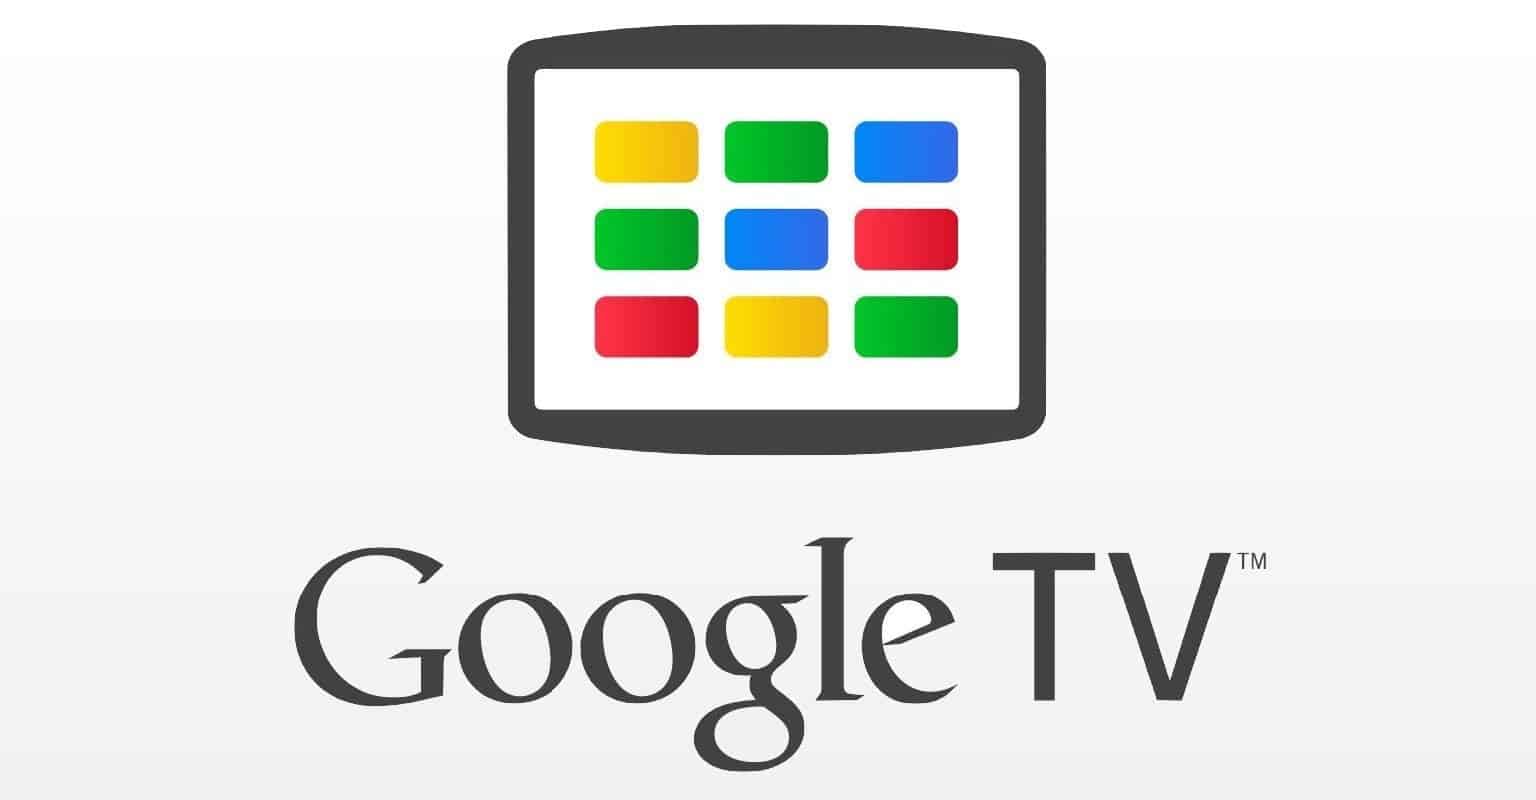 Android TV with a new UI could be rebranded as Google TV